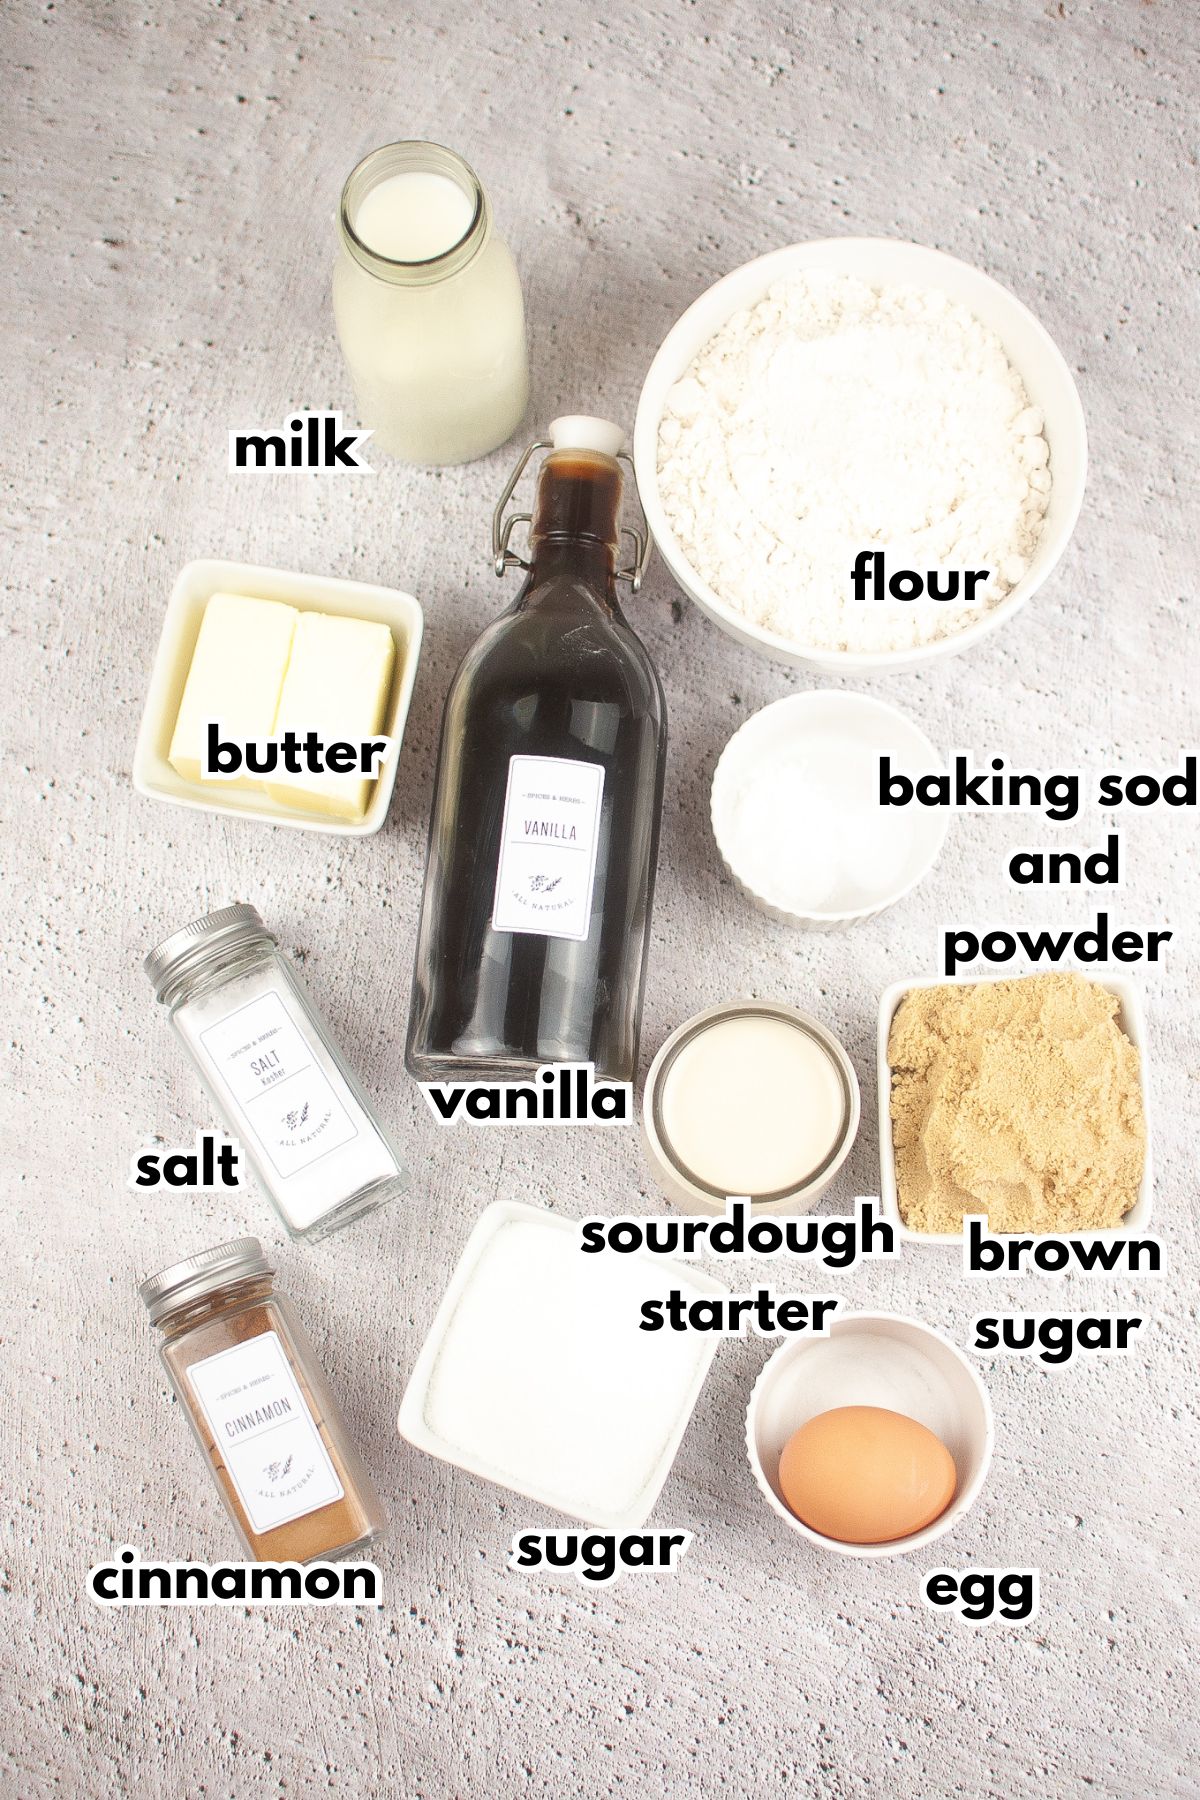 ingredients needed to make sourdough cinnamon muffin on a counter.